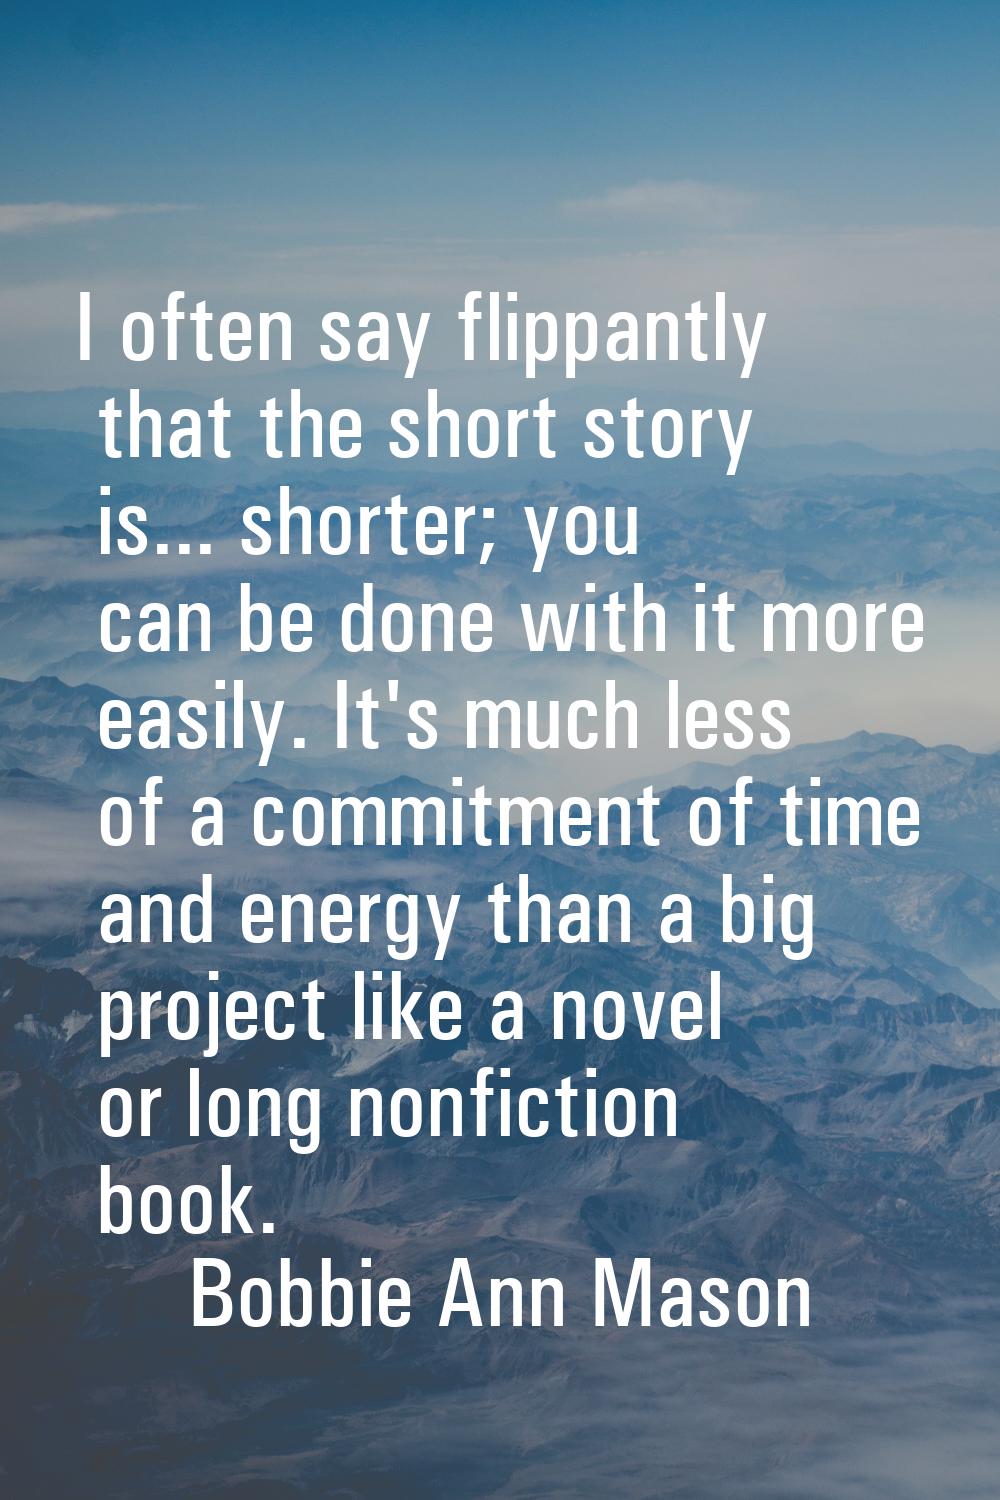 I often say flippantly that the short story is... shorter; you can be done with it more easily. It'